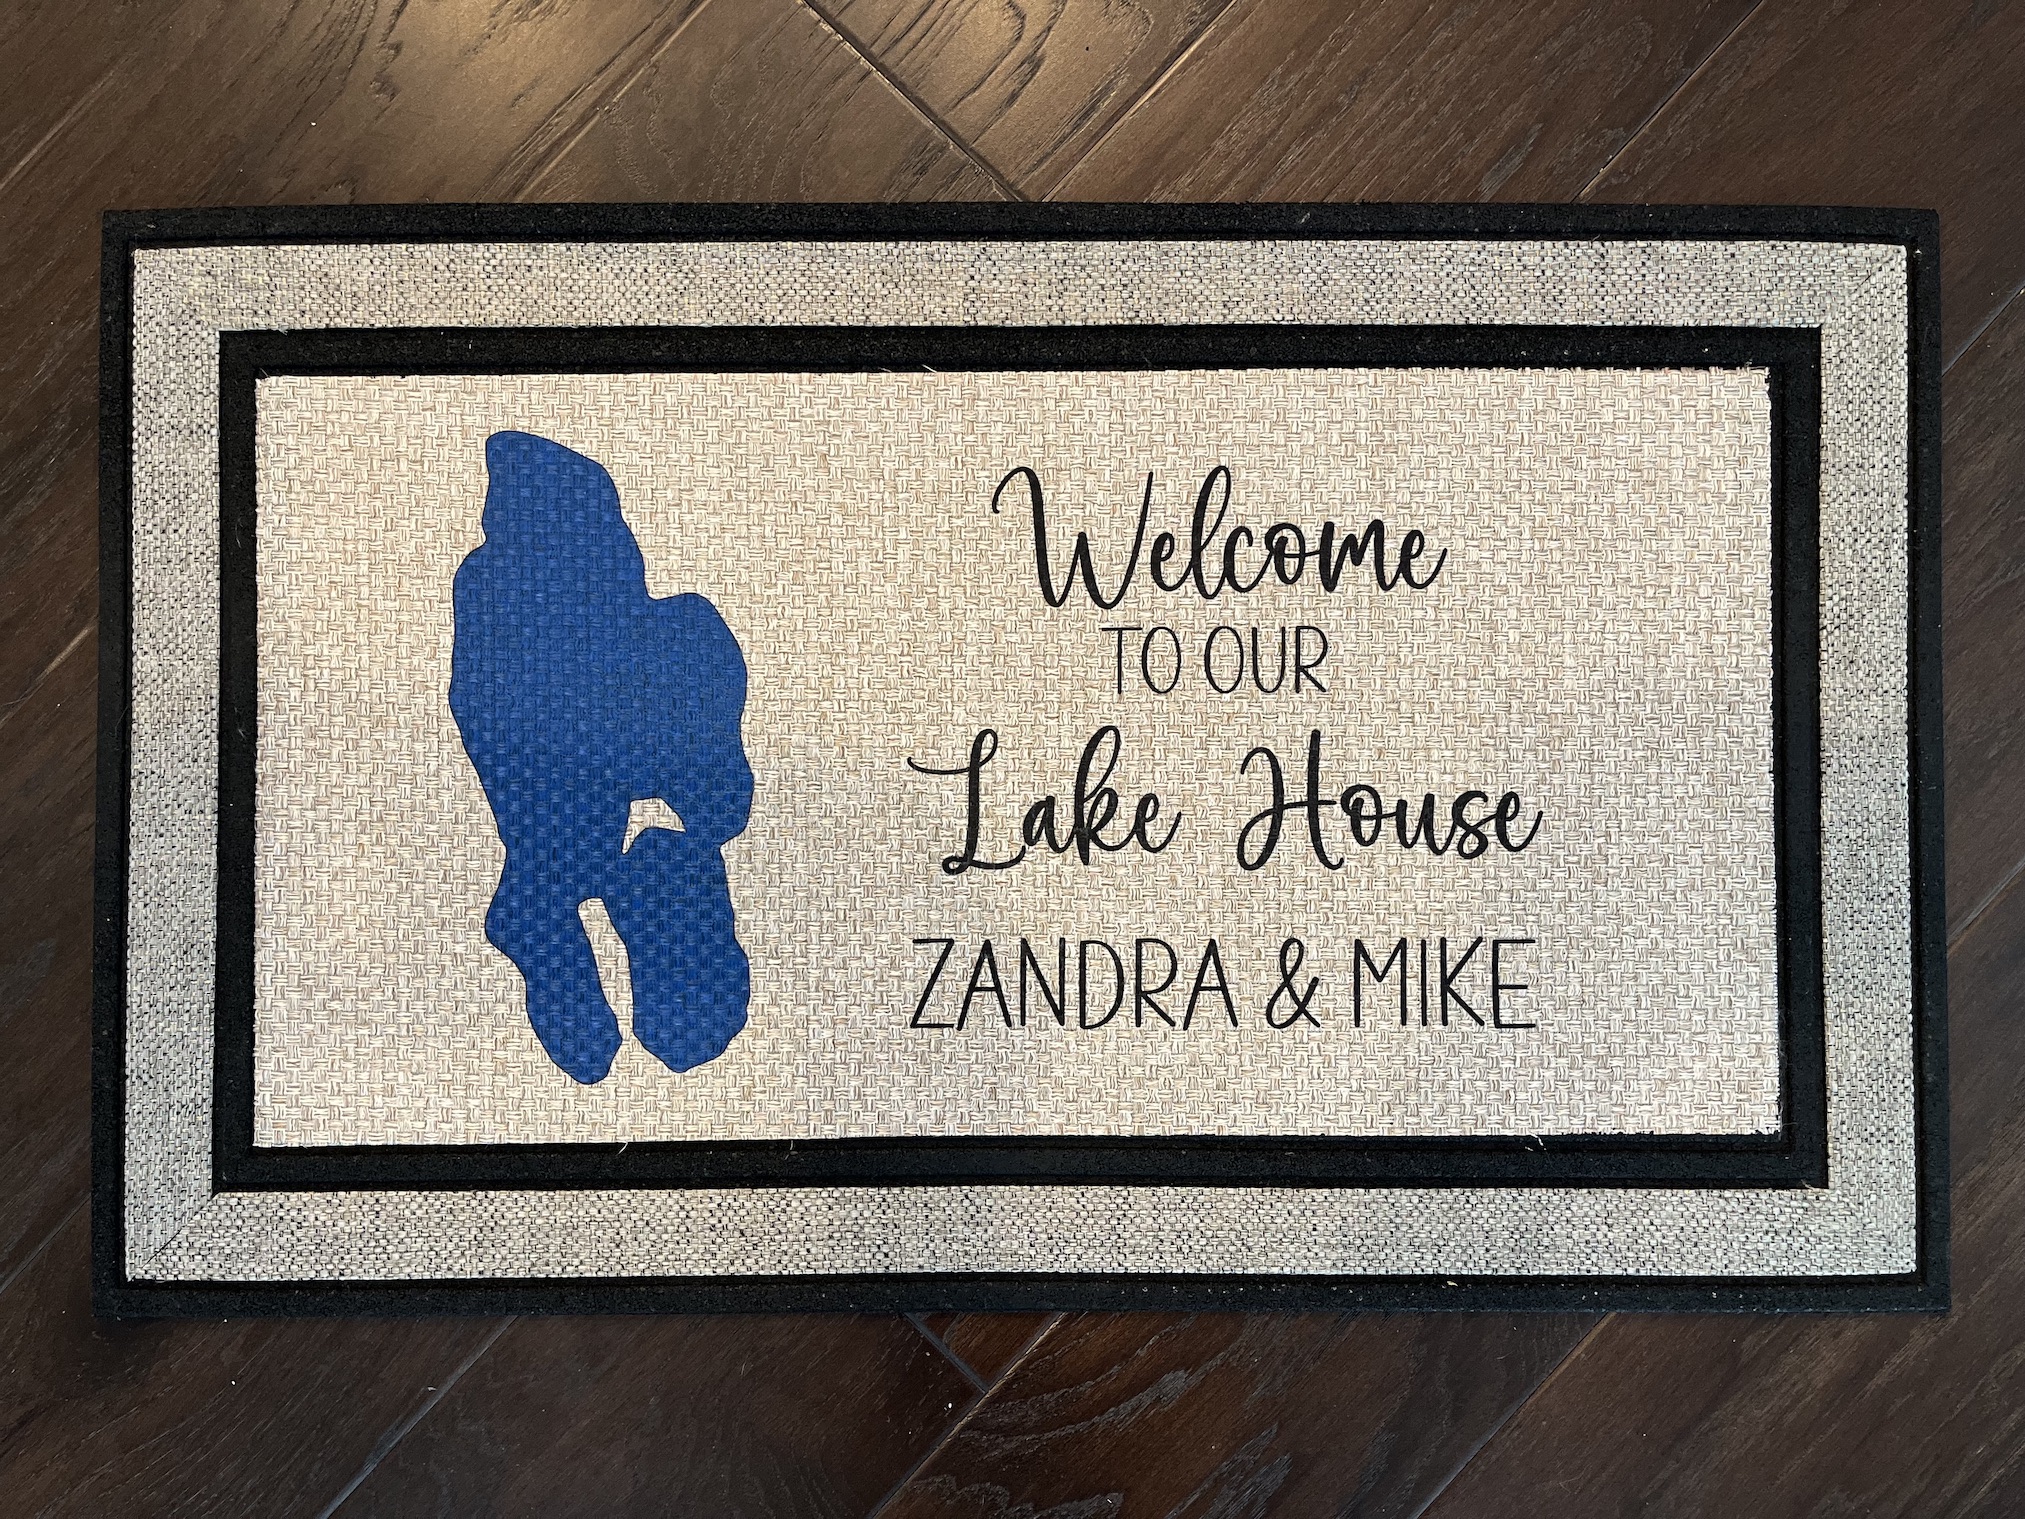 Door Mat - Leasing Center. Welcome residents and guests with